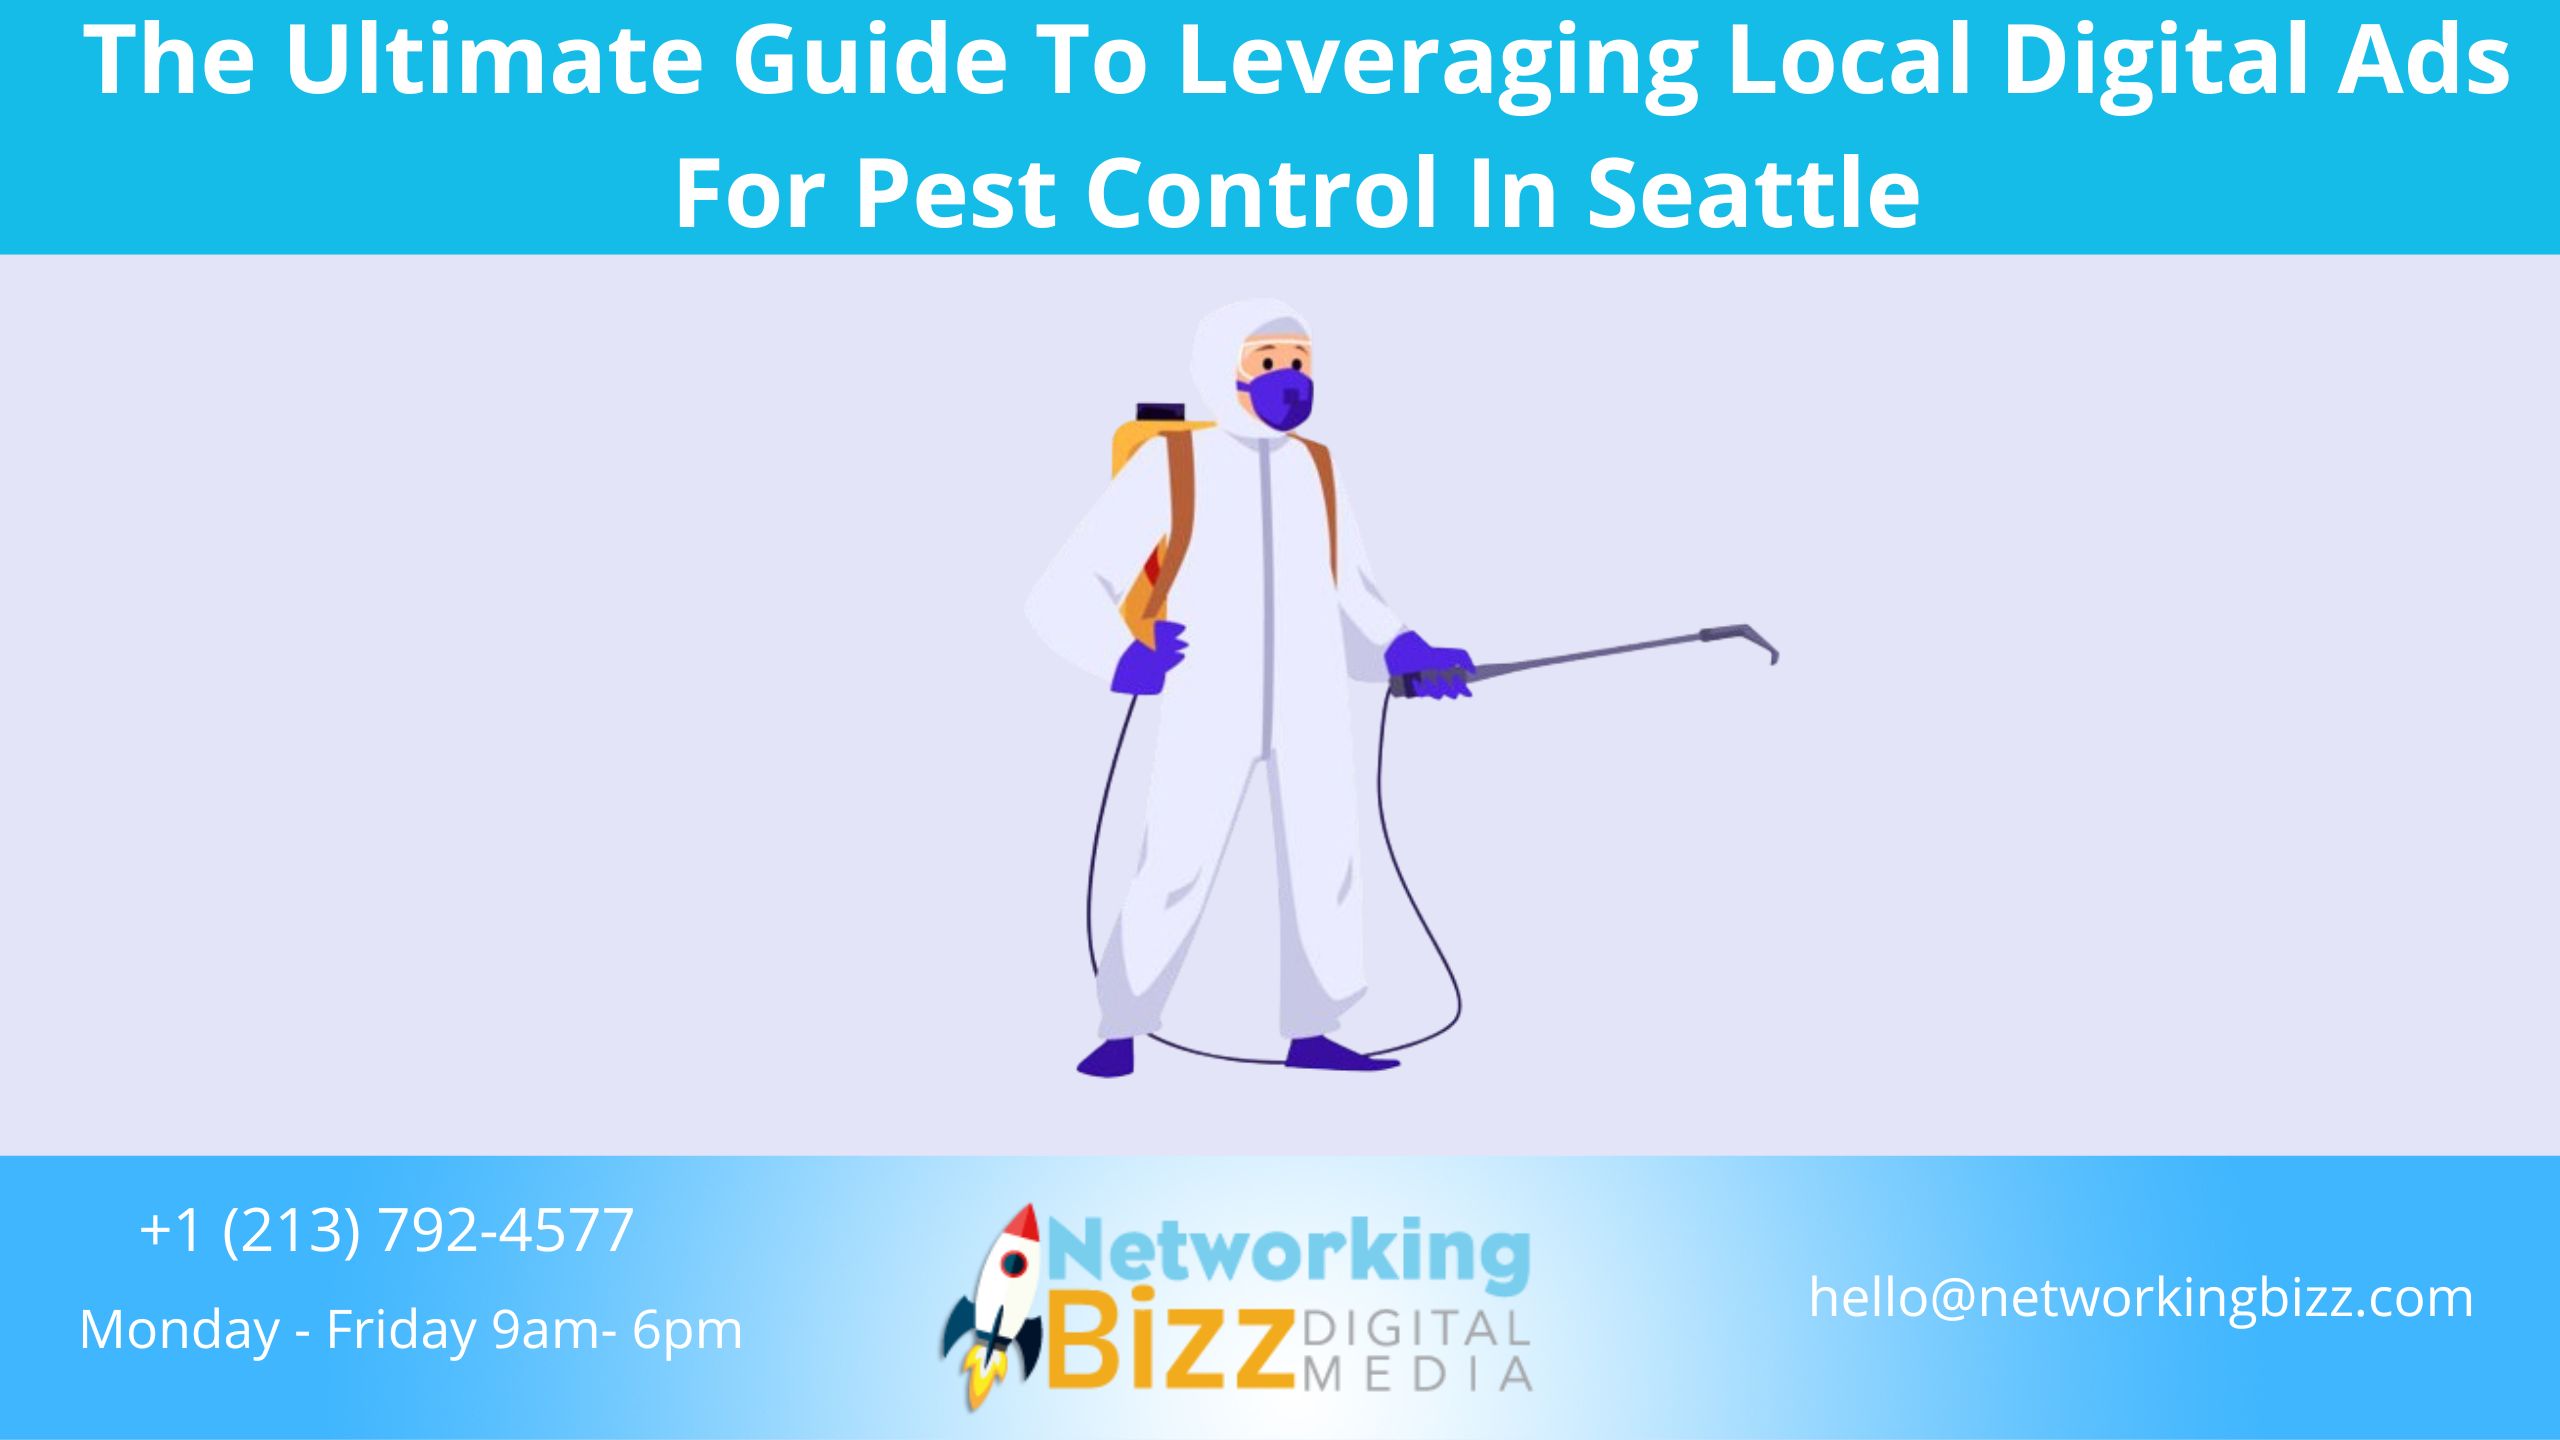 The Ultimate Guide To Leveraging Local Digital Ads For Pest Control In Seattle